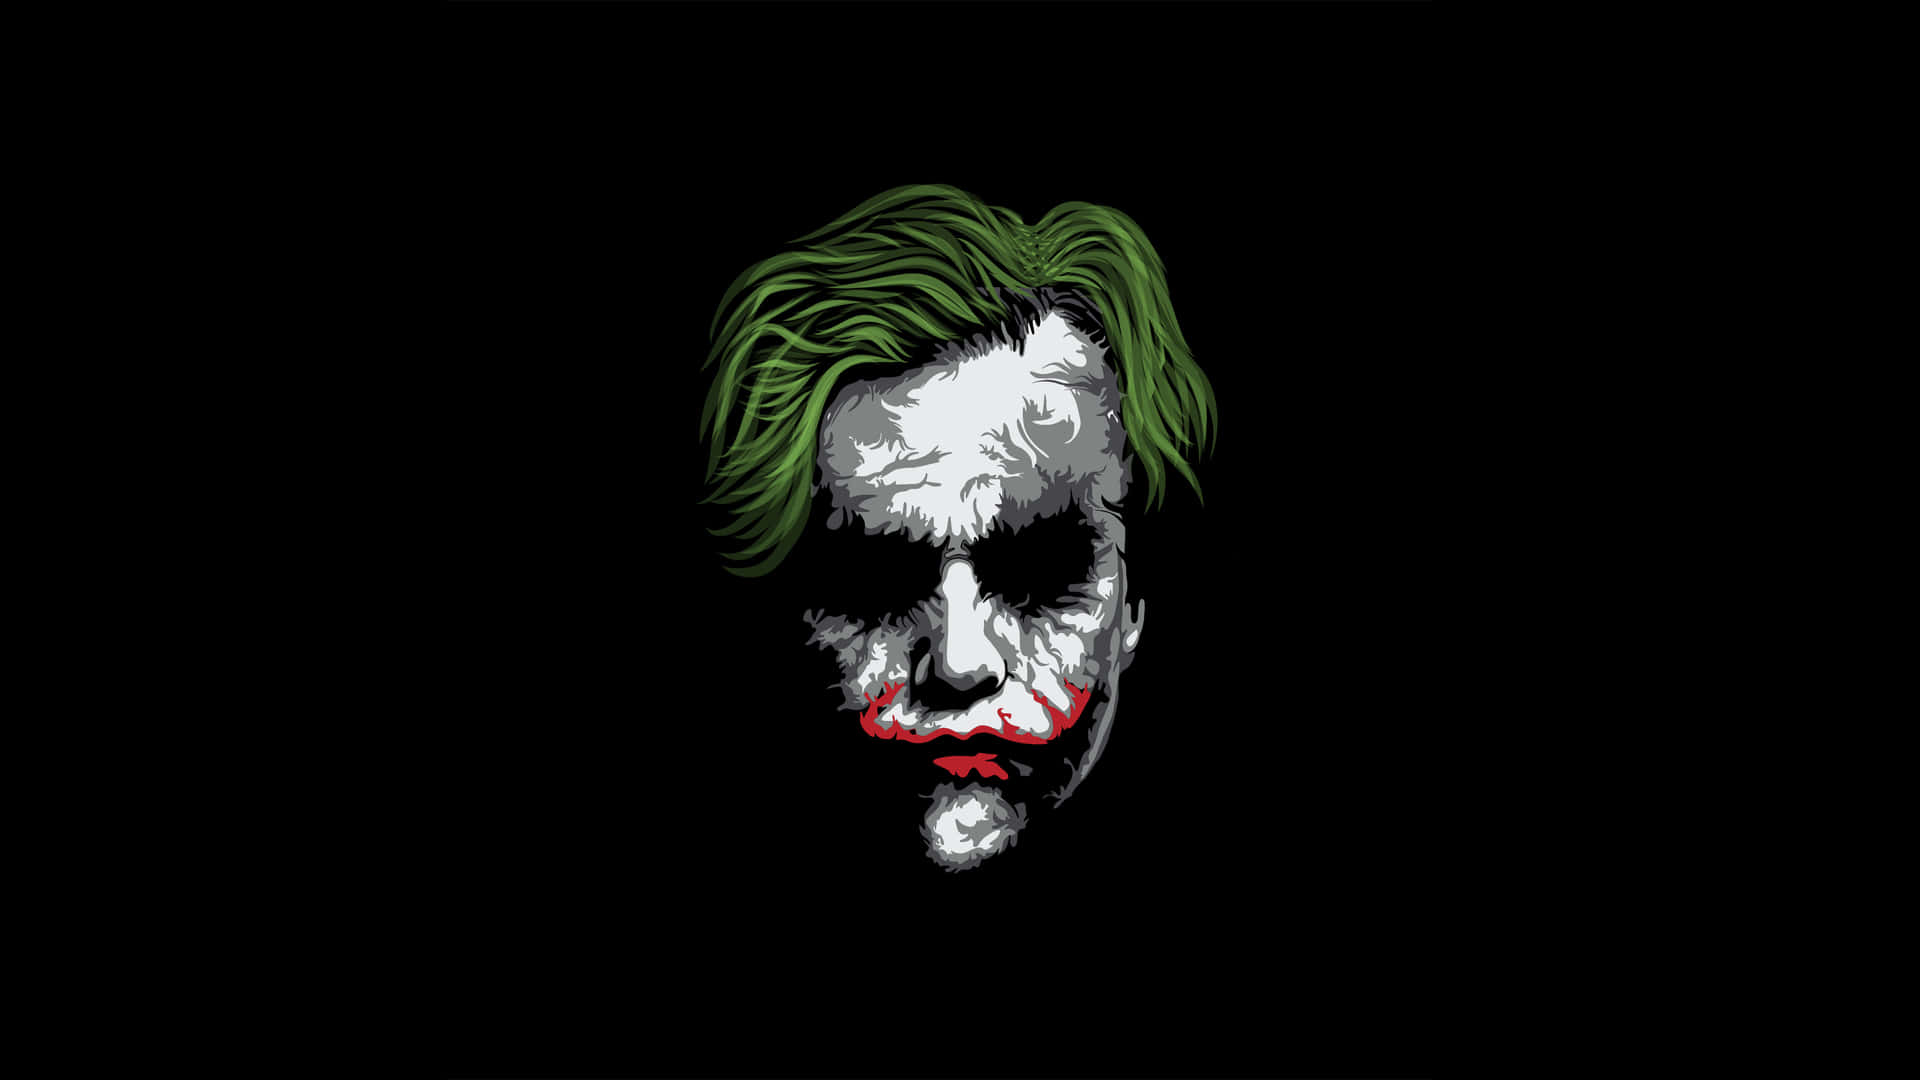 Download The Joker, Mastermind Of Chaos | Wallpapers.com